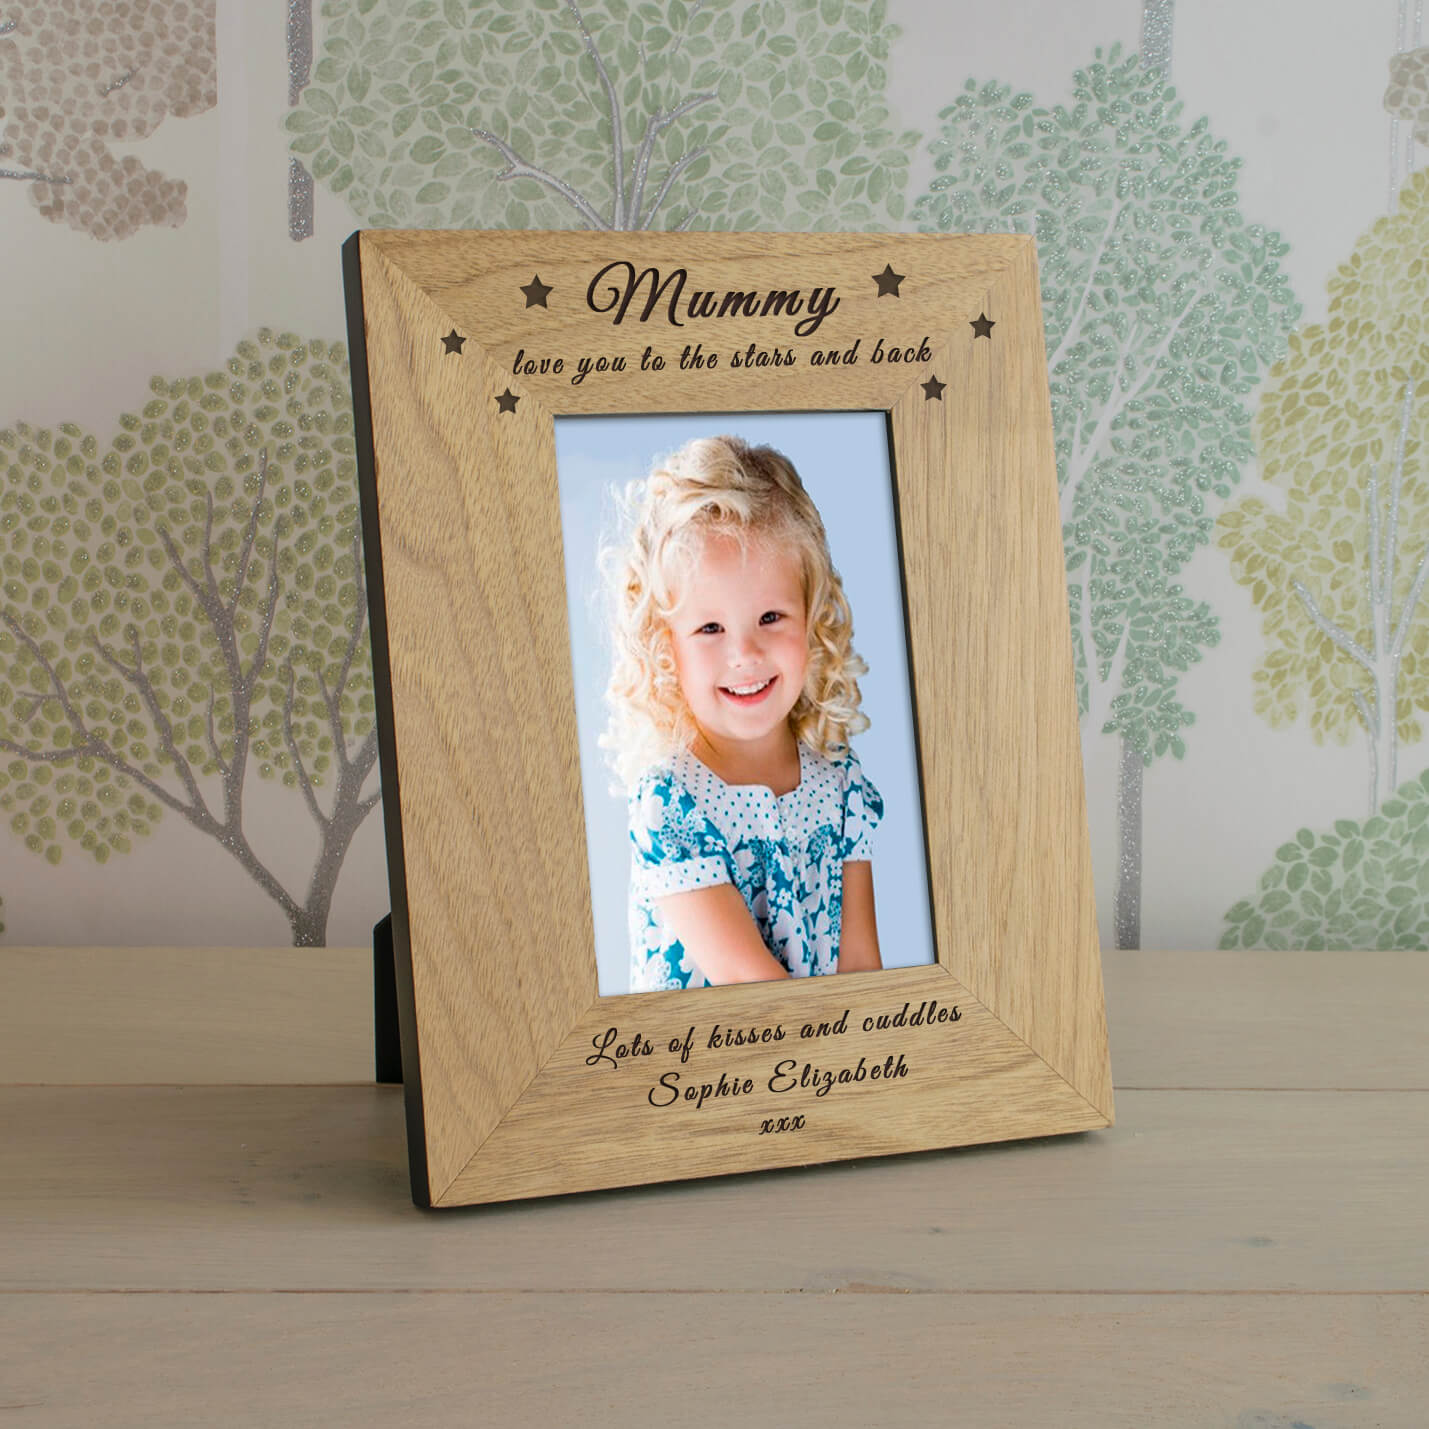 Personalised Wooden Photo Frame – Stars and Back